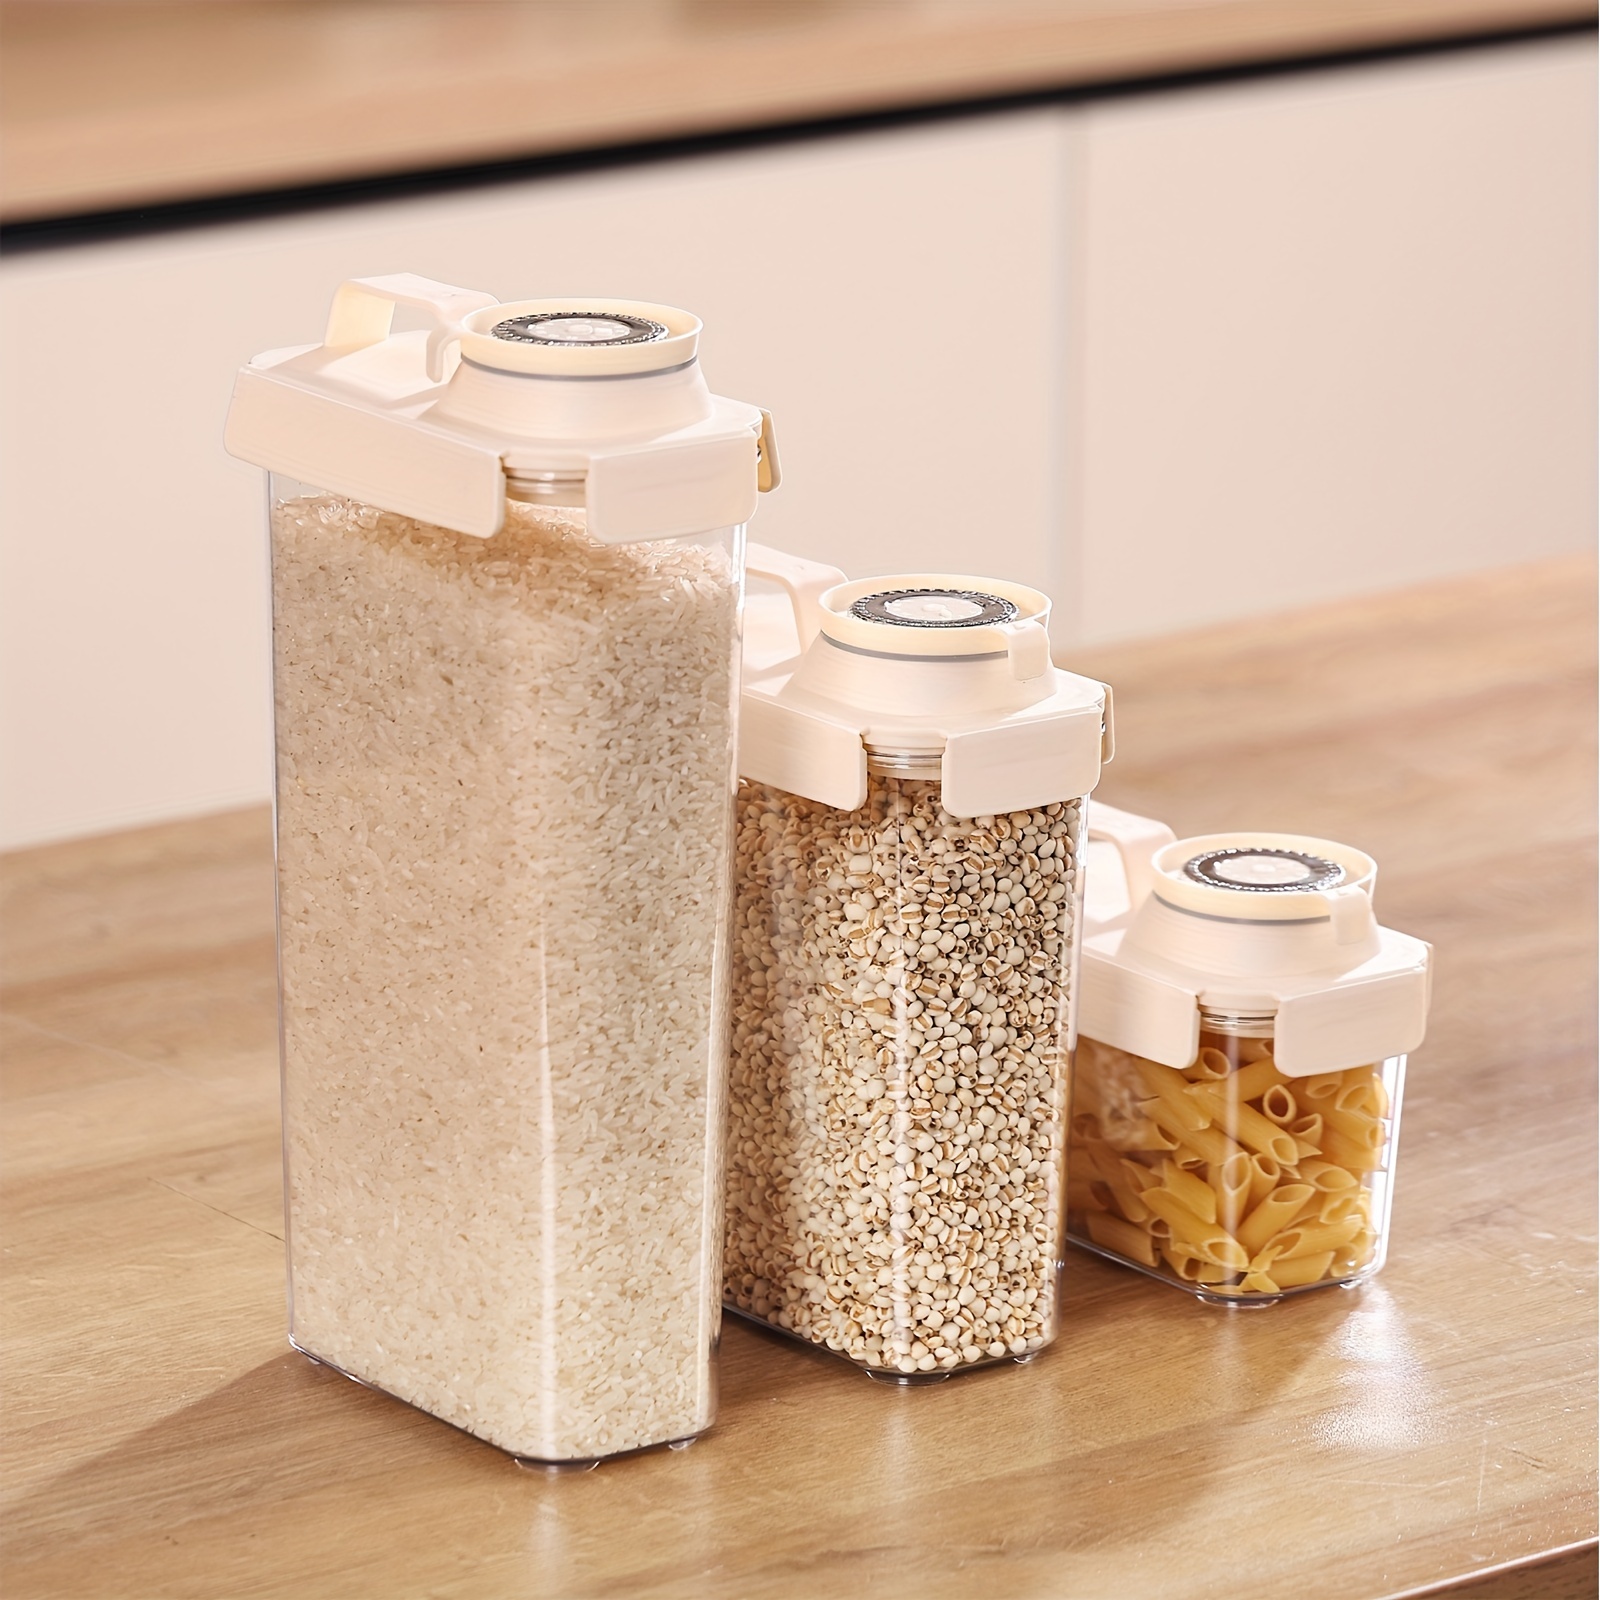 Kitchen Sealed Moisture-proof Insect-proof Storage Box For Rice, Oats, Etc.